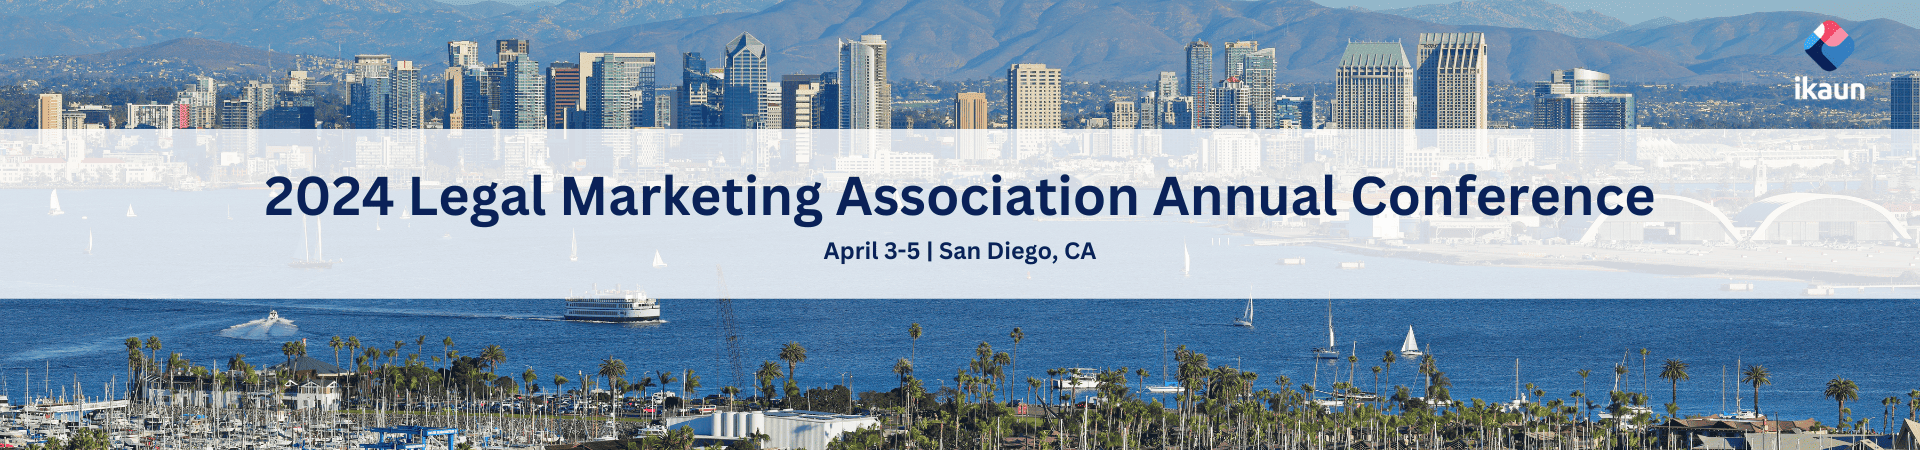 2024 Legal Marketing Association Annual Conference